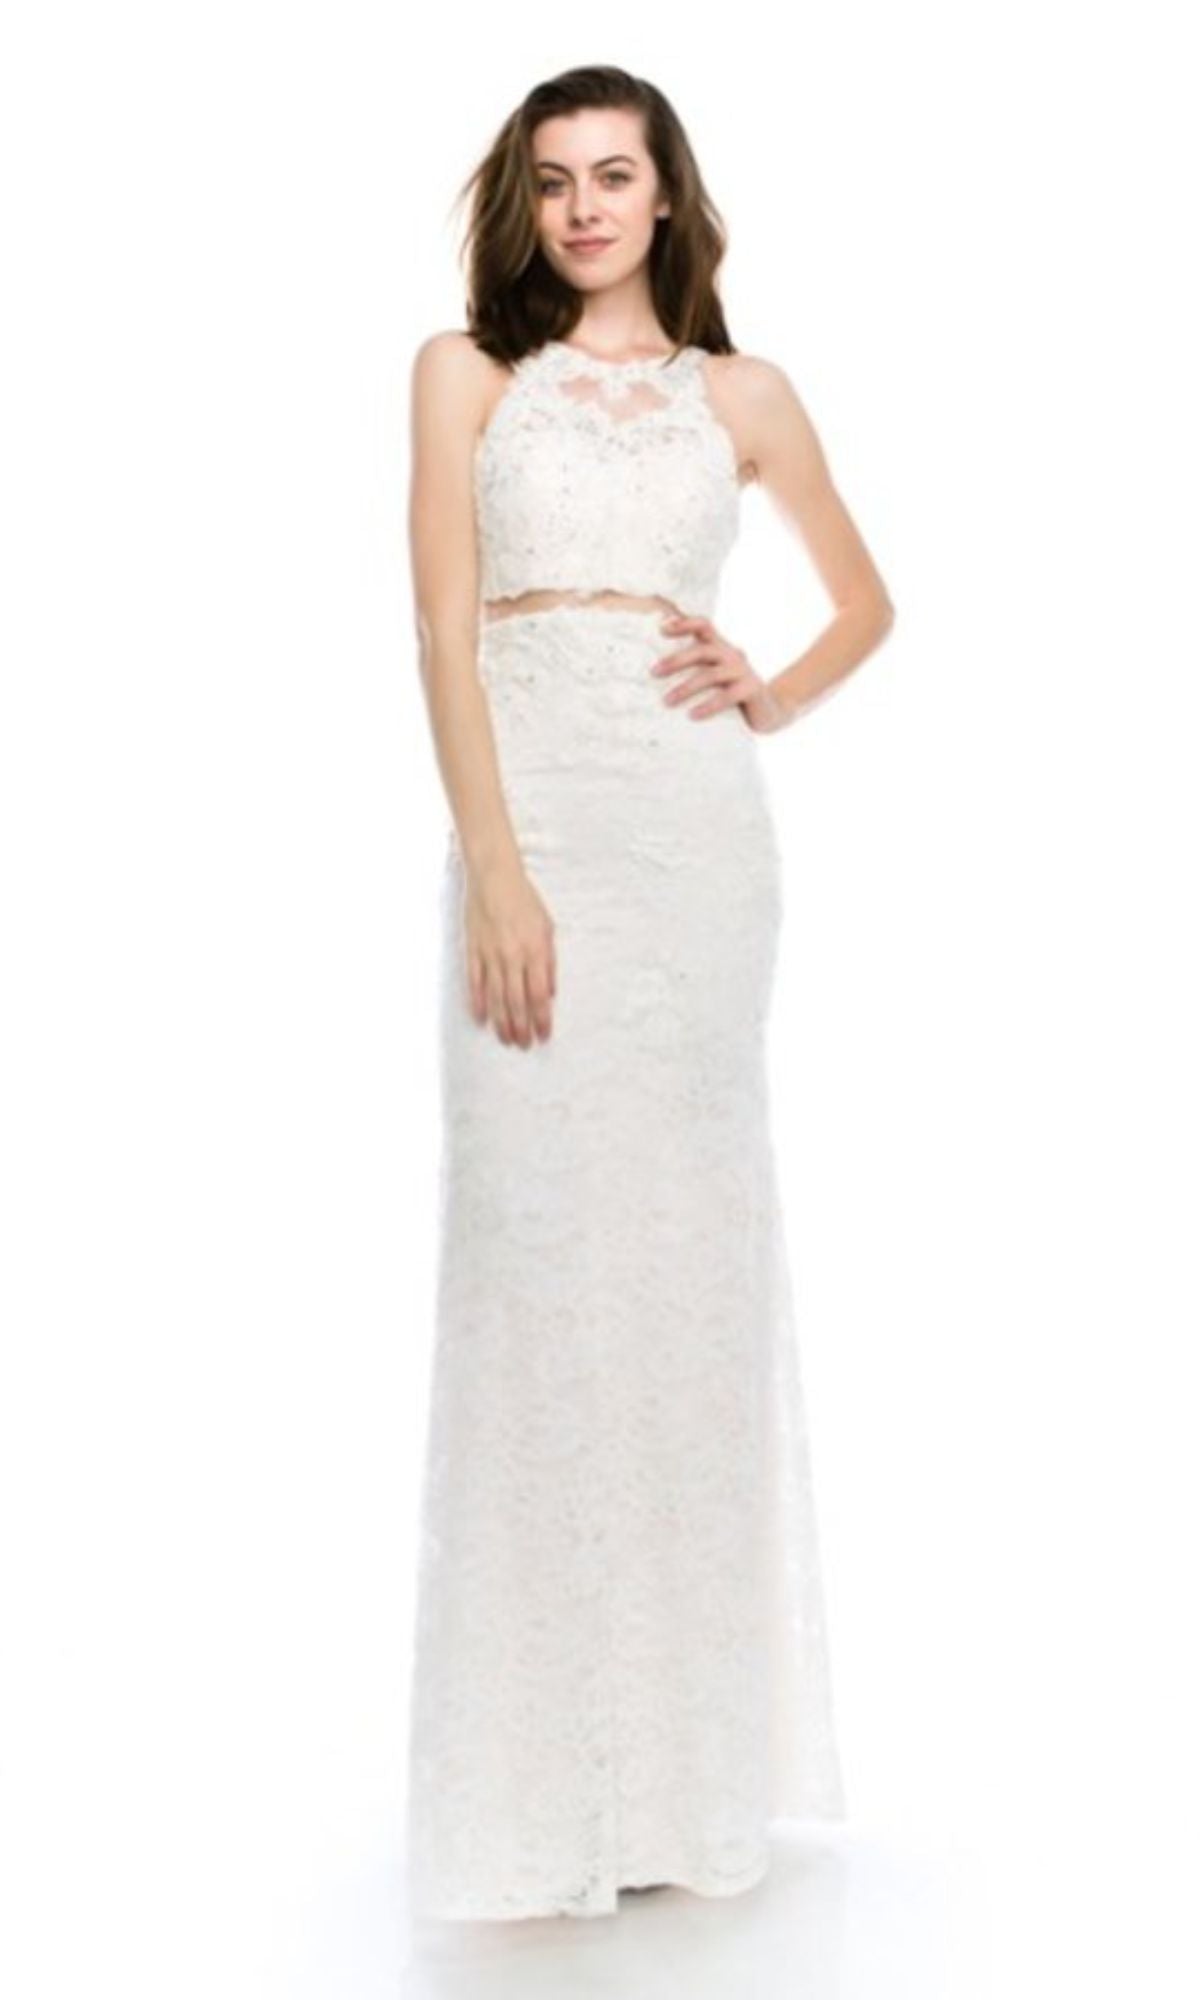 Long Prom Dress CR4225 by Chicas